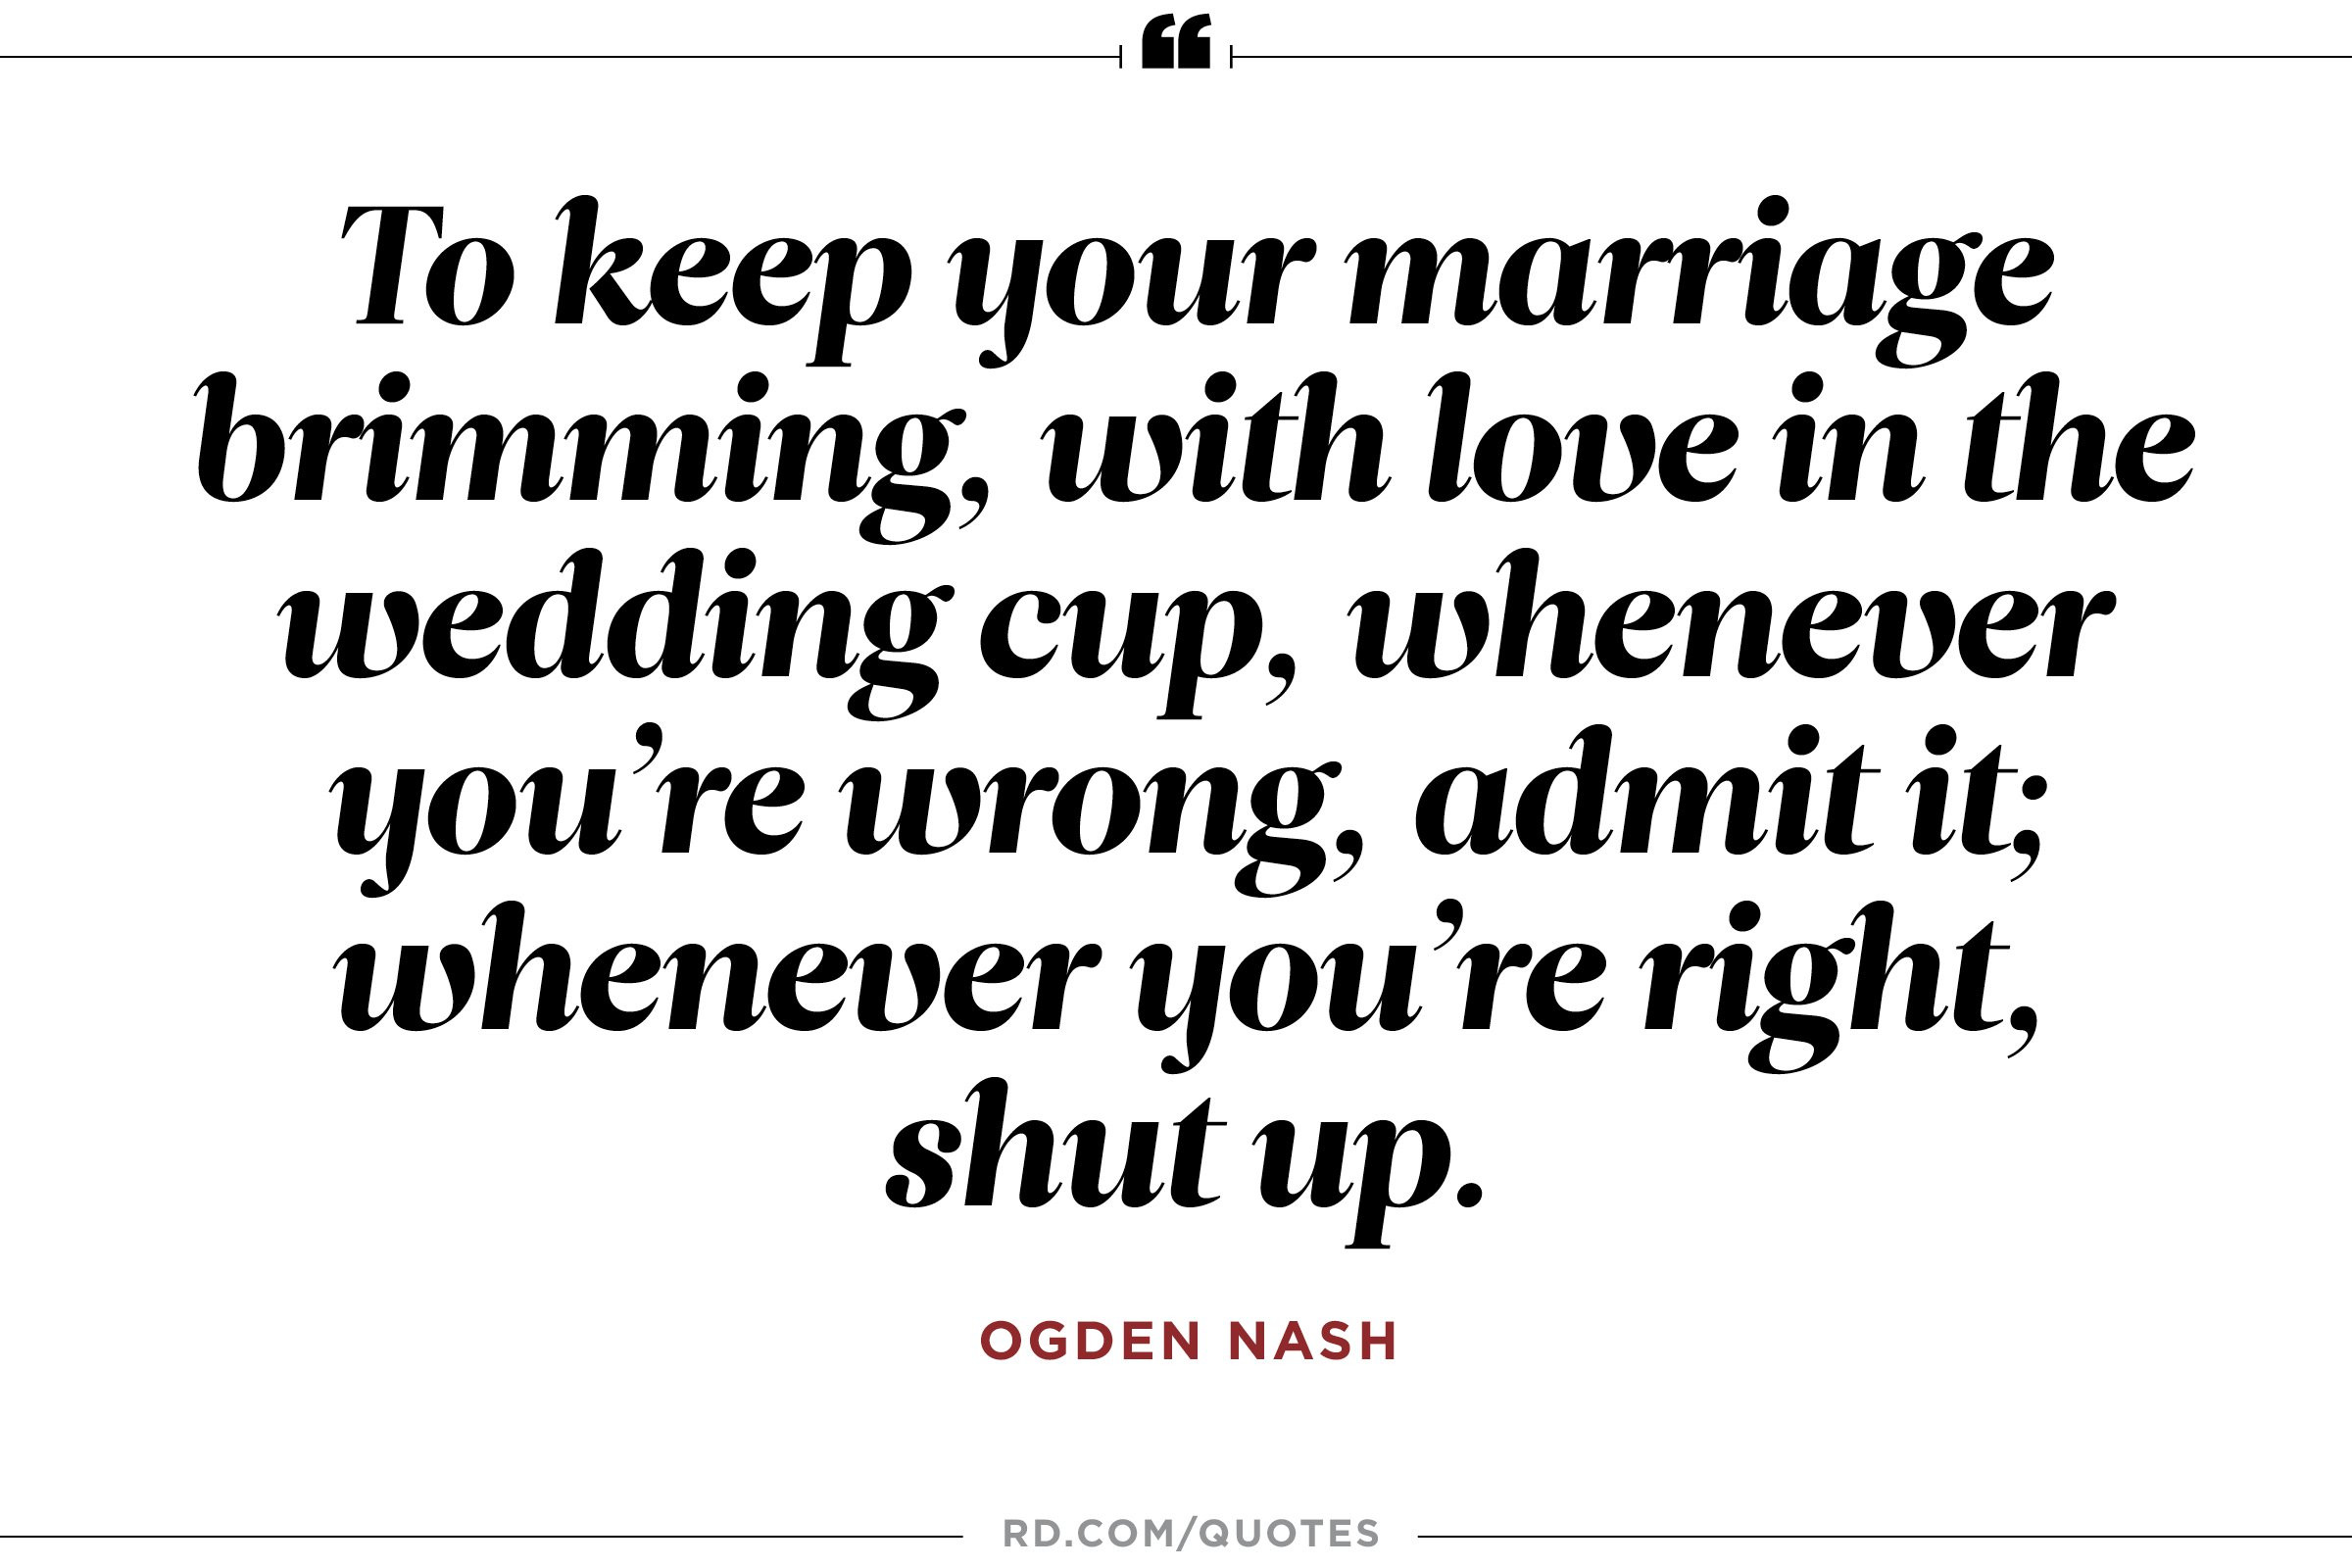 Marriage Humor Quotes
 8 Funny Marriage Quotes From the Greatest Wits of All Time